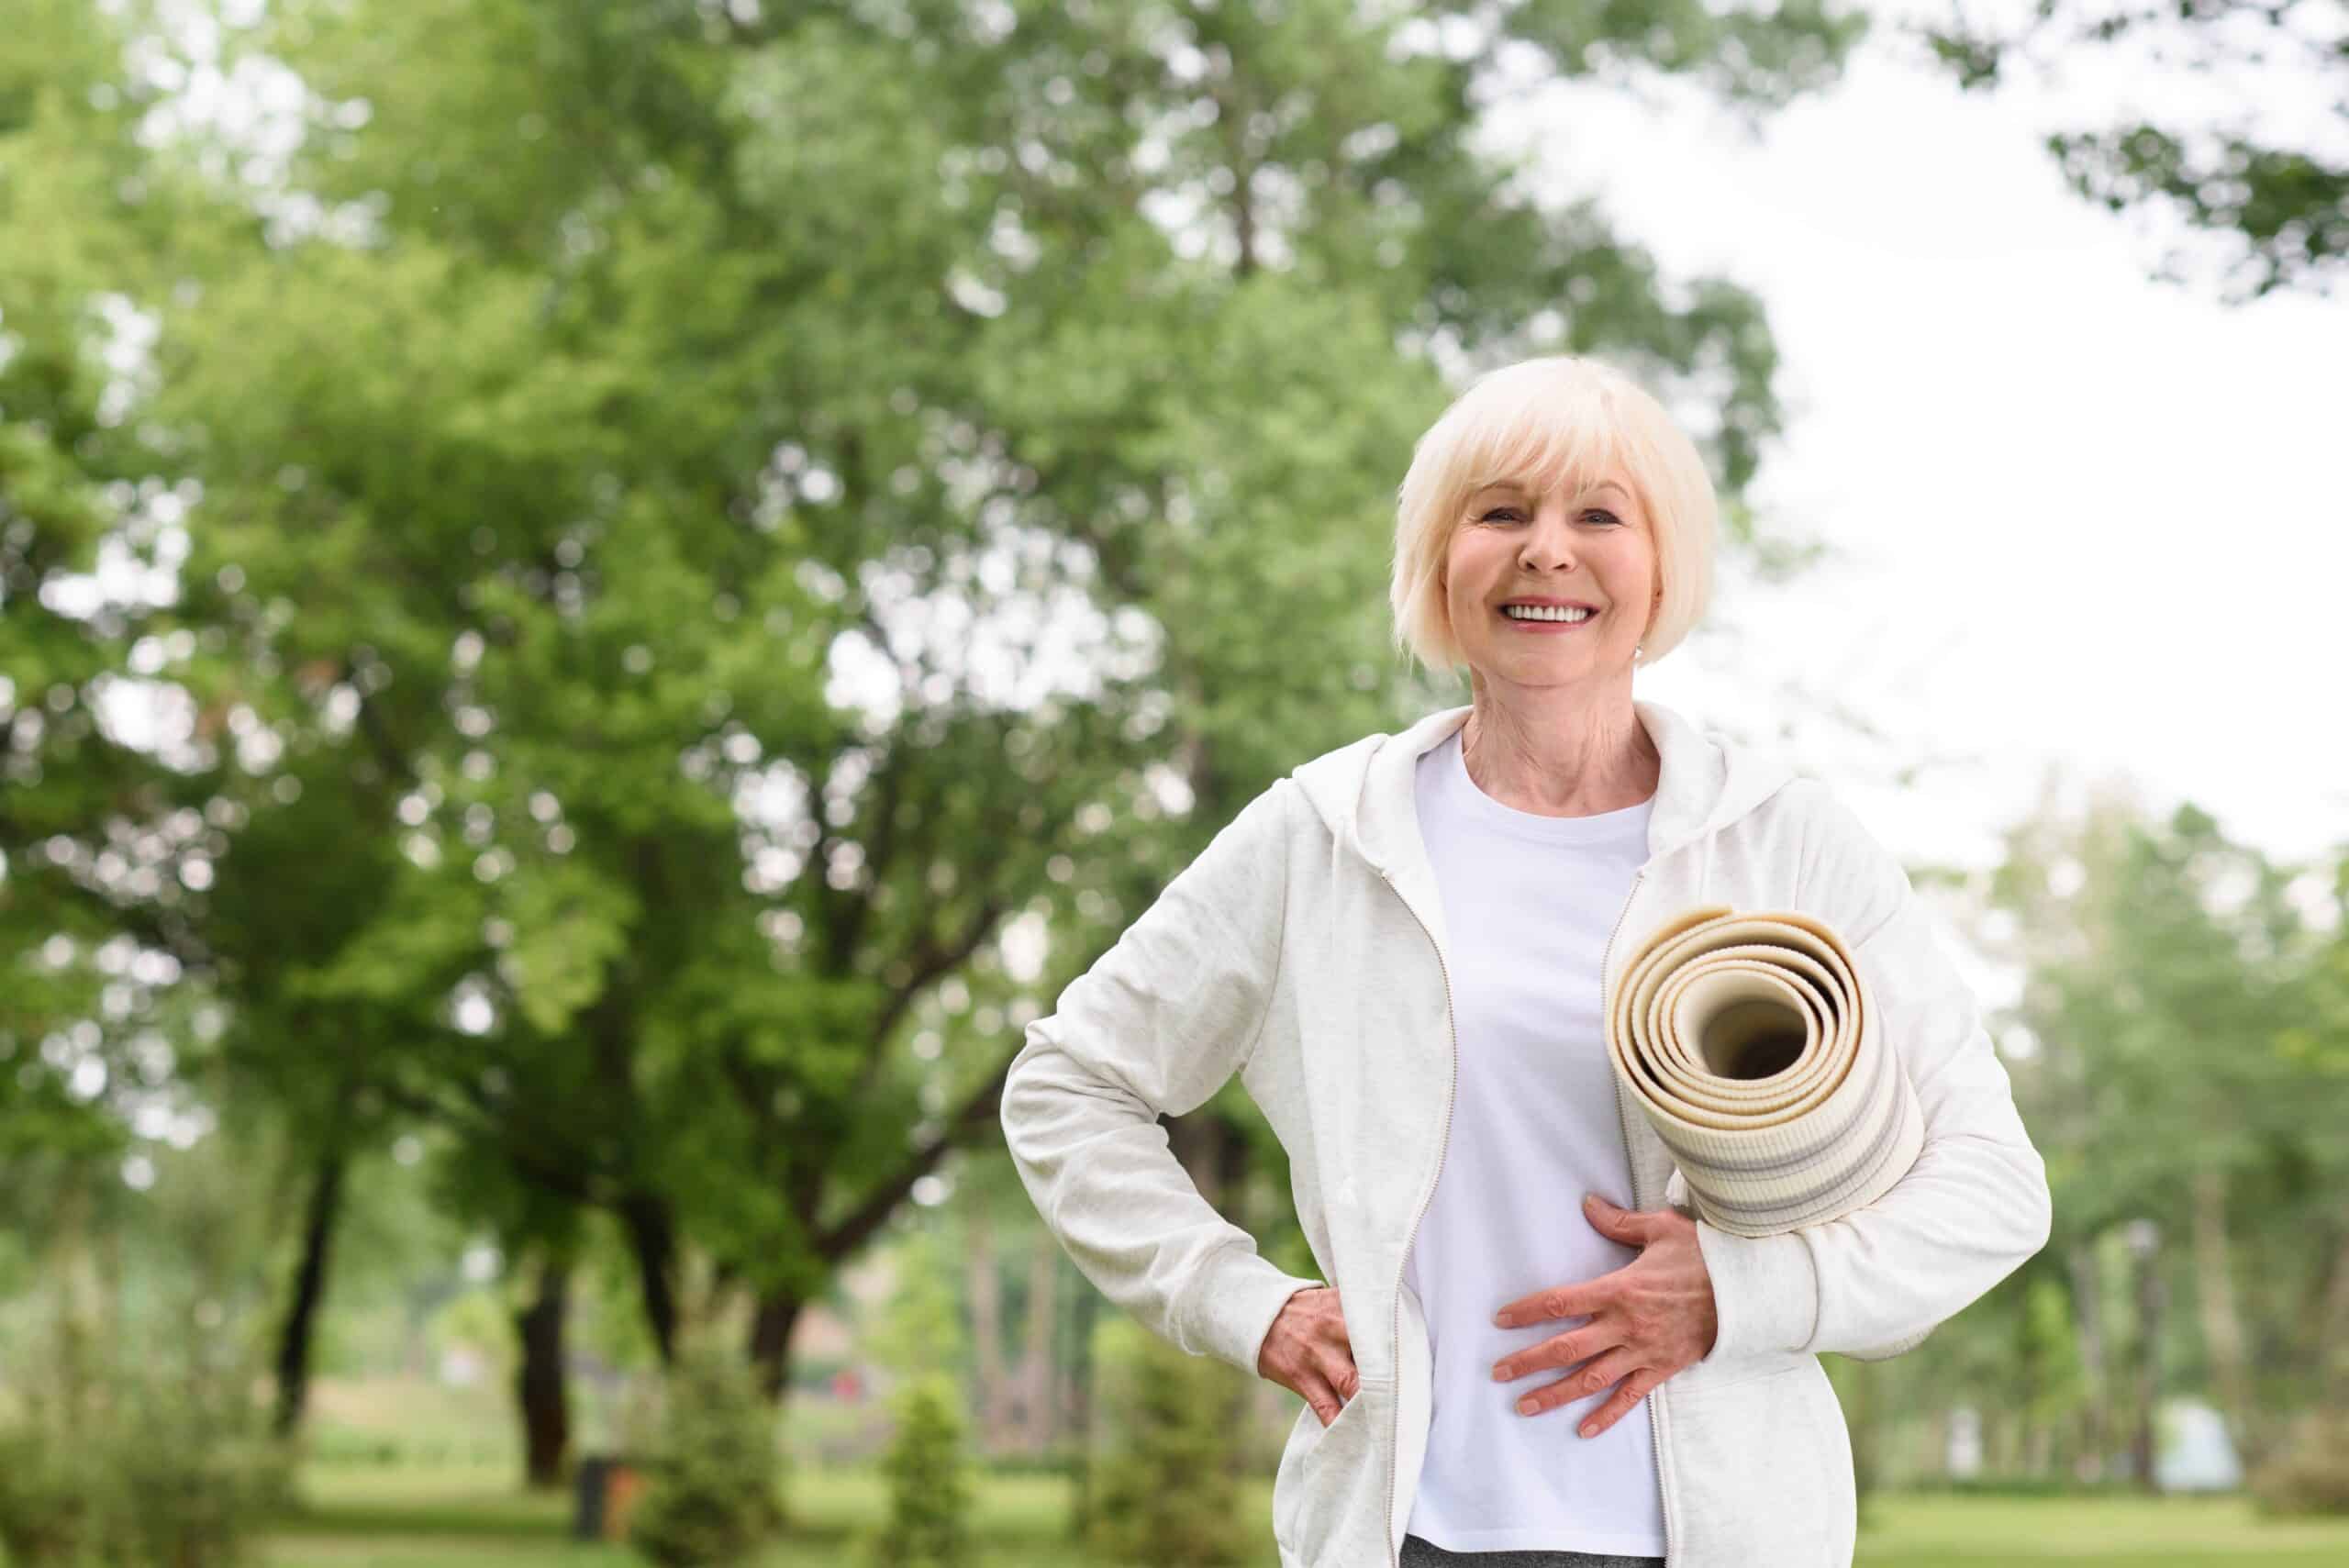 Smiling senior woman holding a yoga mat in the park